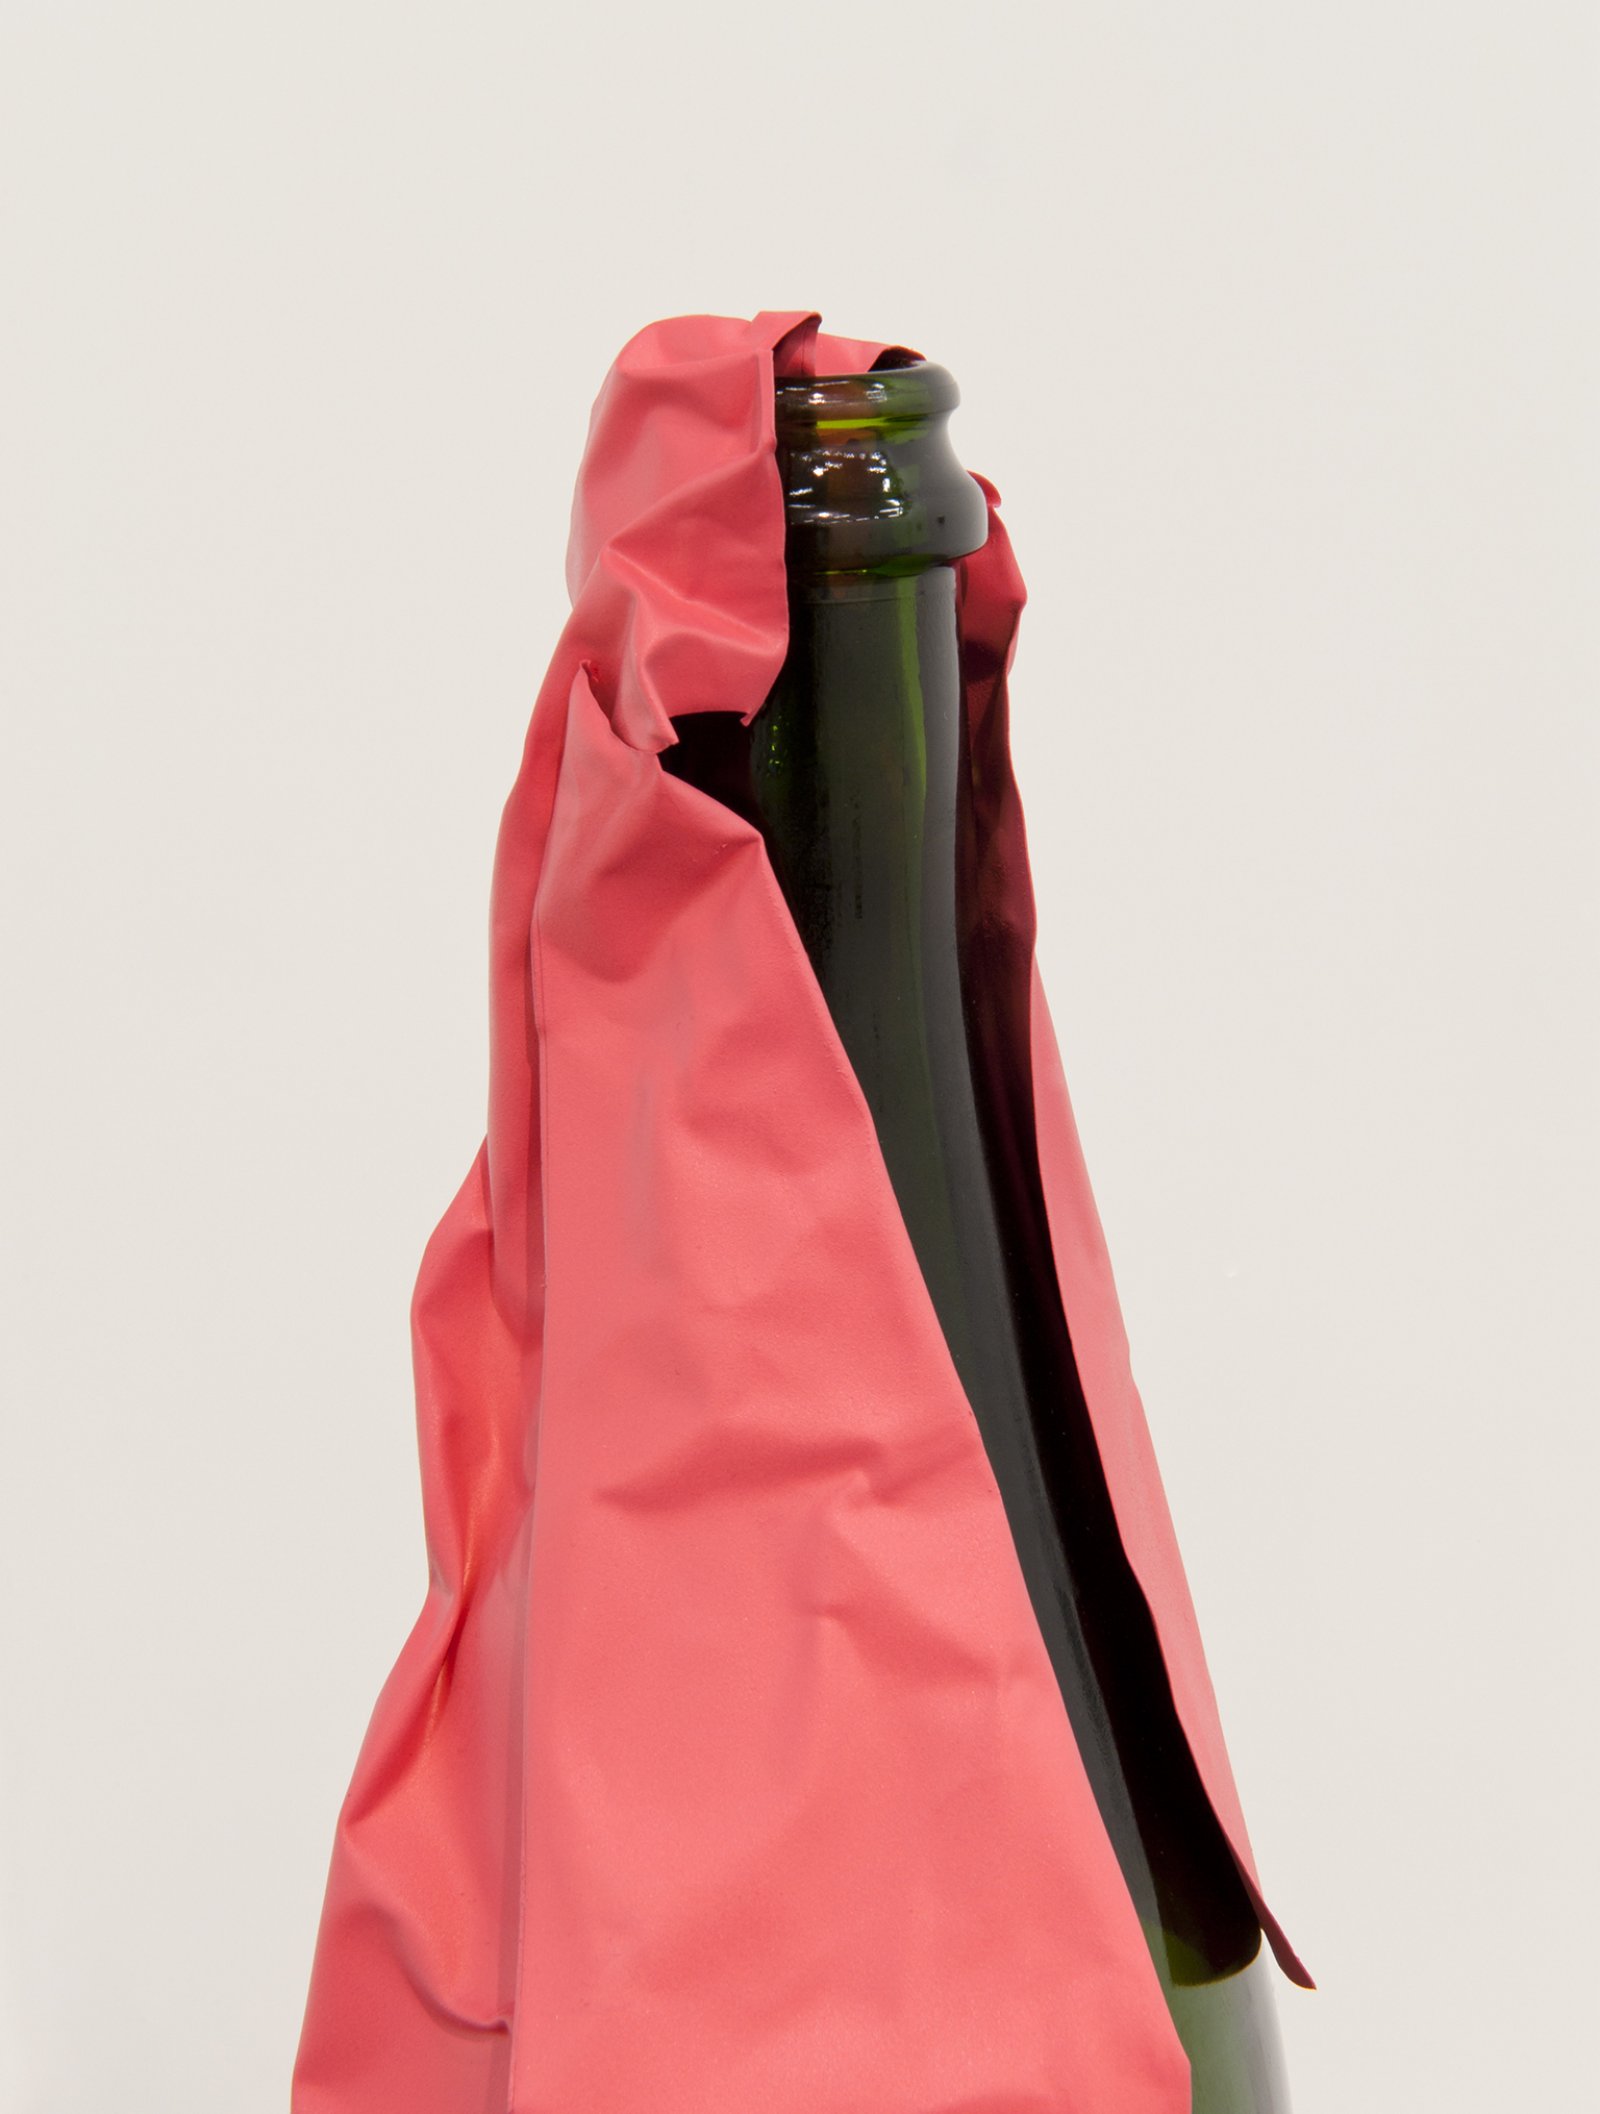 ​Judy Radul, Object Analysis Spectator Poem (Bottle) (detail), 2012, painted copper, green glass bottle, colour photograph, bottle: 13 x 4 x 4 in. (32 x 9 x 9 cm), photo: 8 x 11 x 5 in. (20 x 28 x 13 cm)   by Judy Radul